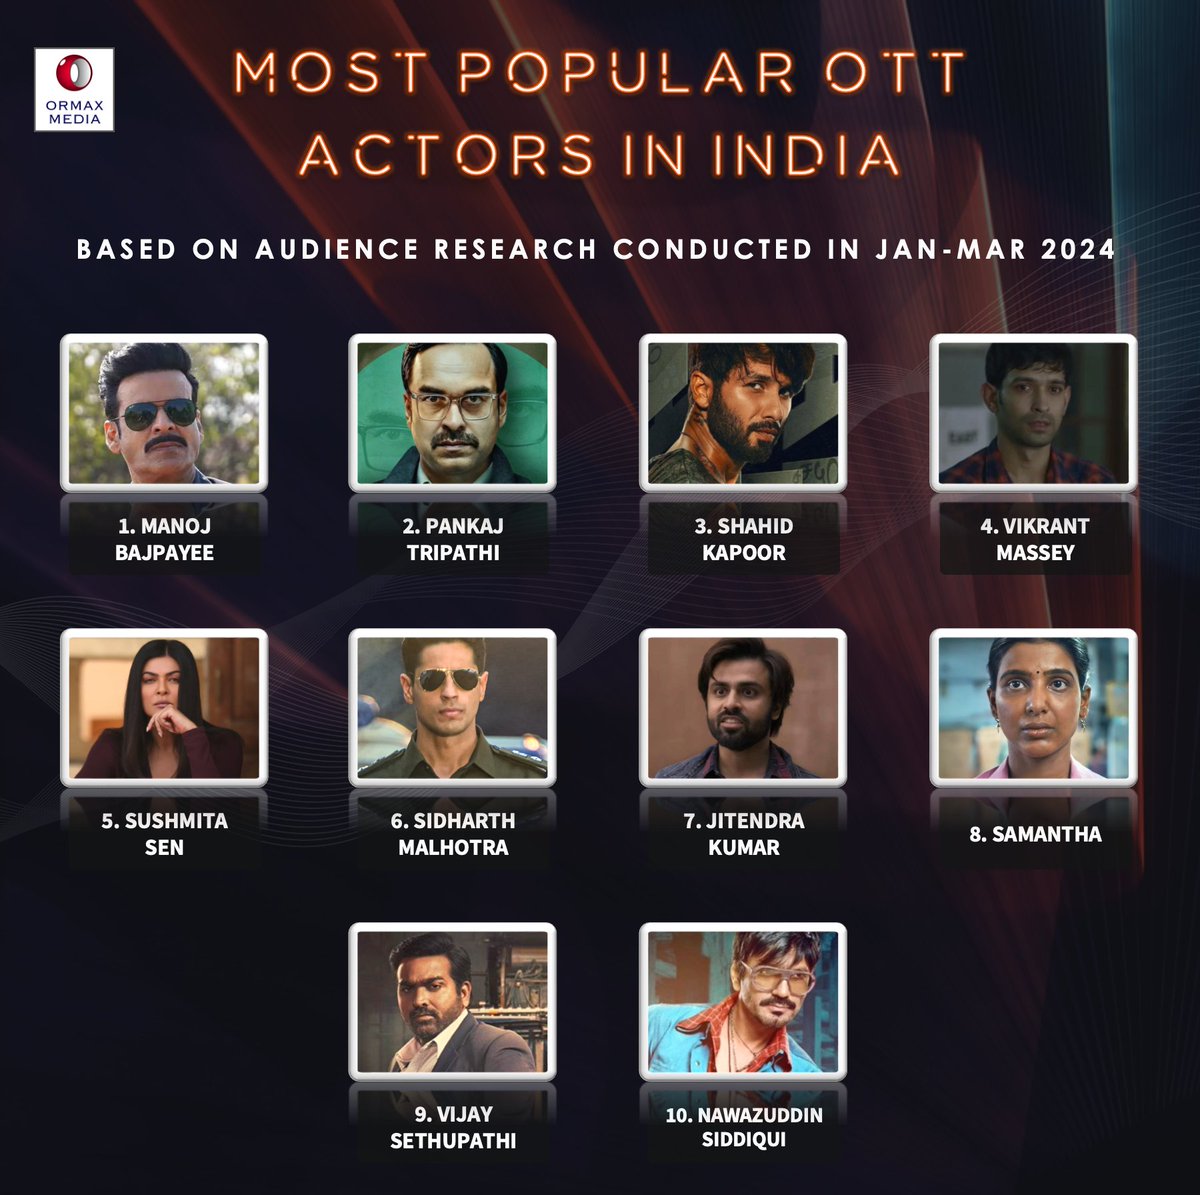 Most popular OTT actors in India (Jan-Mar 2024): @BajpayeeManoj tops the list and @SidMalhotra (no.6) makes an entry in the Top 10 #OTT #Streaming